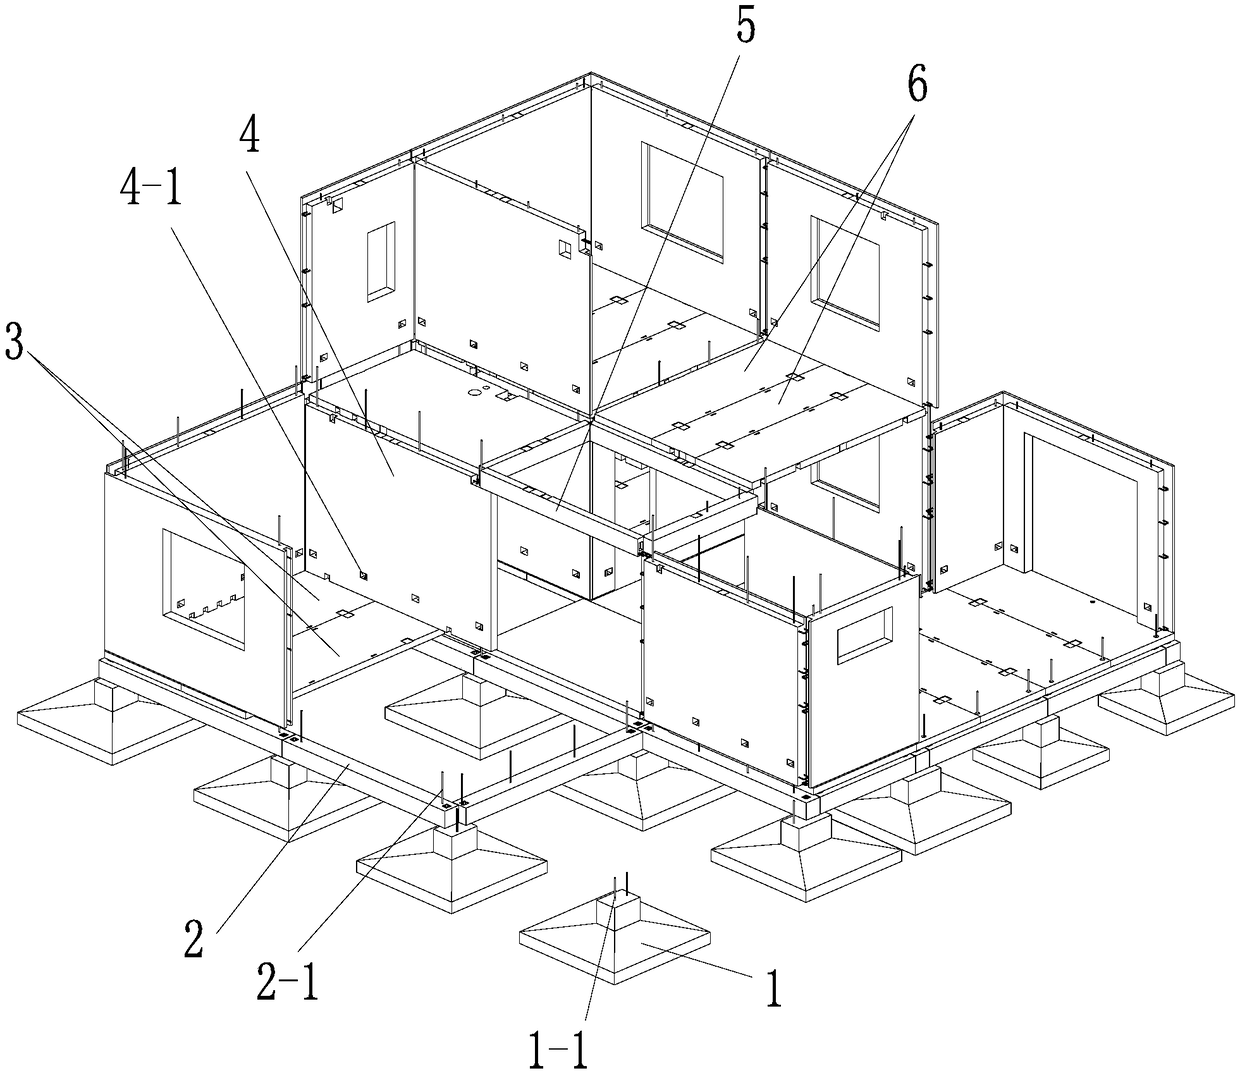 Construction method of low-rise fully-fabricated concrete shear wall structure system